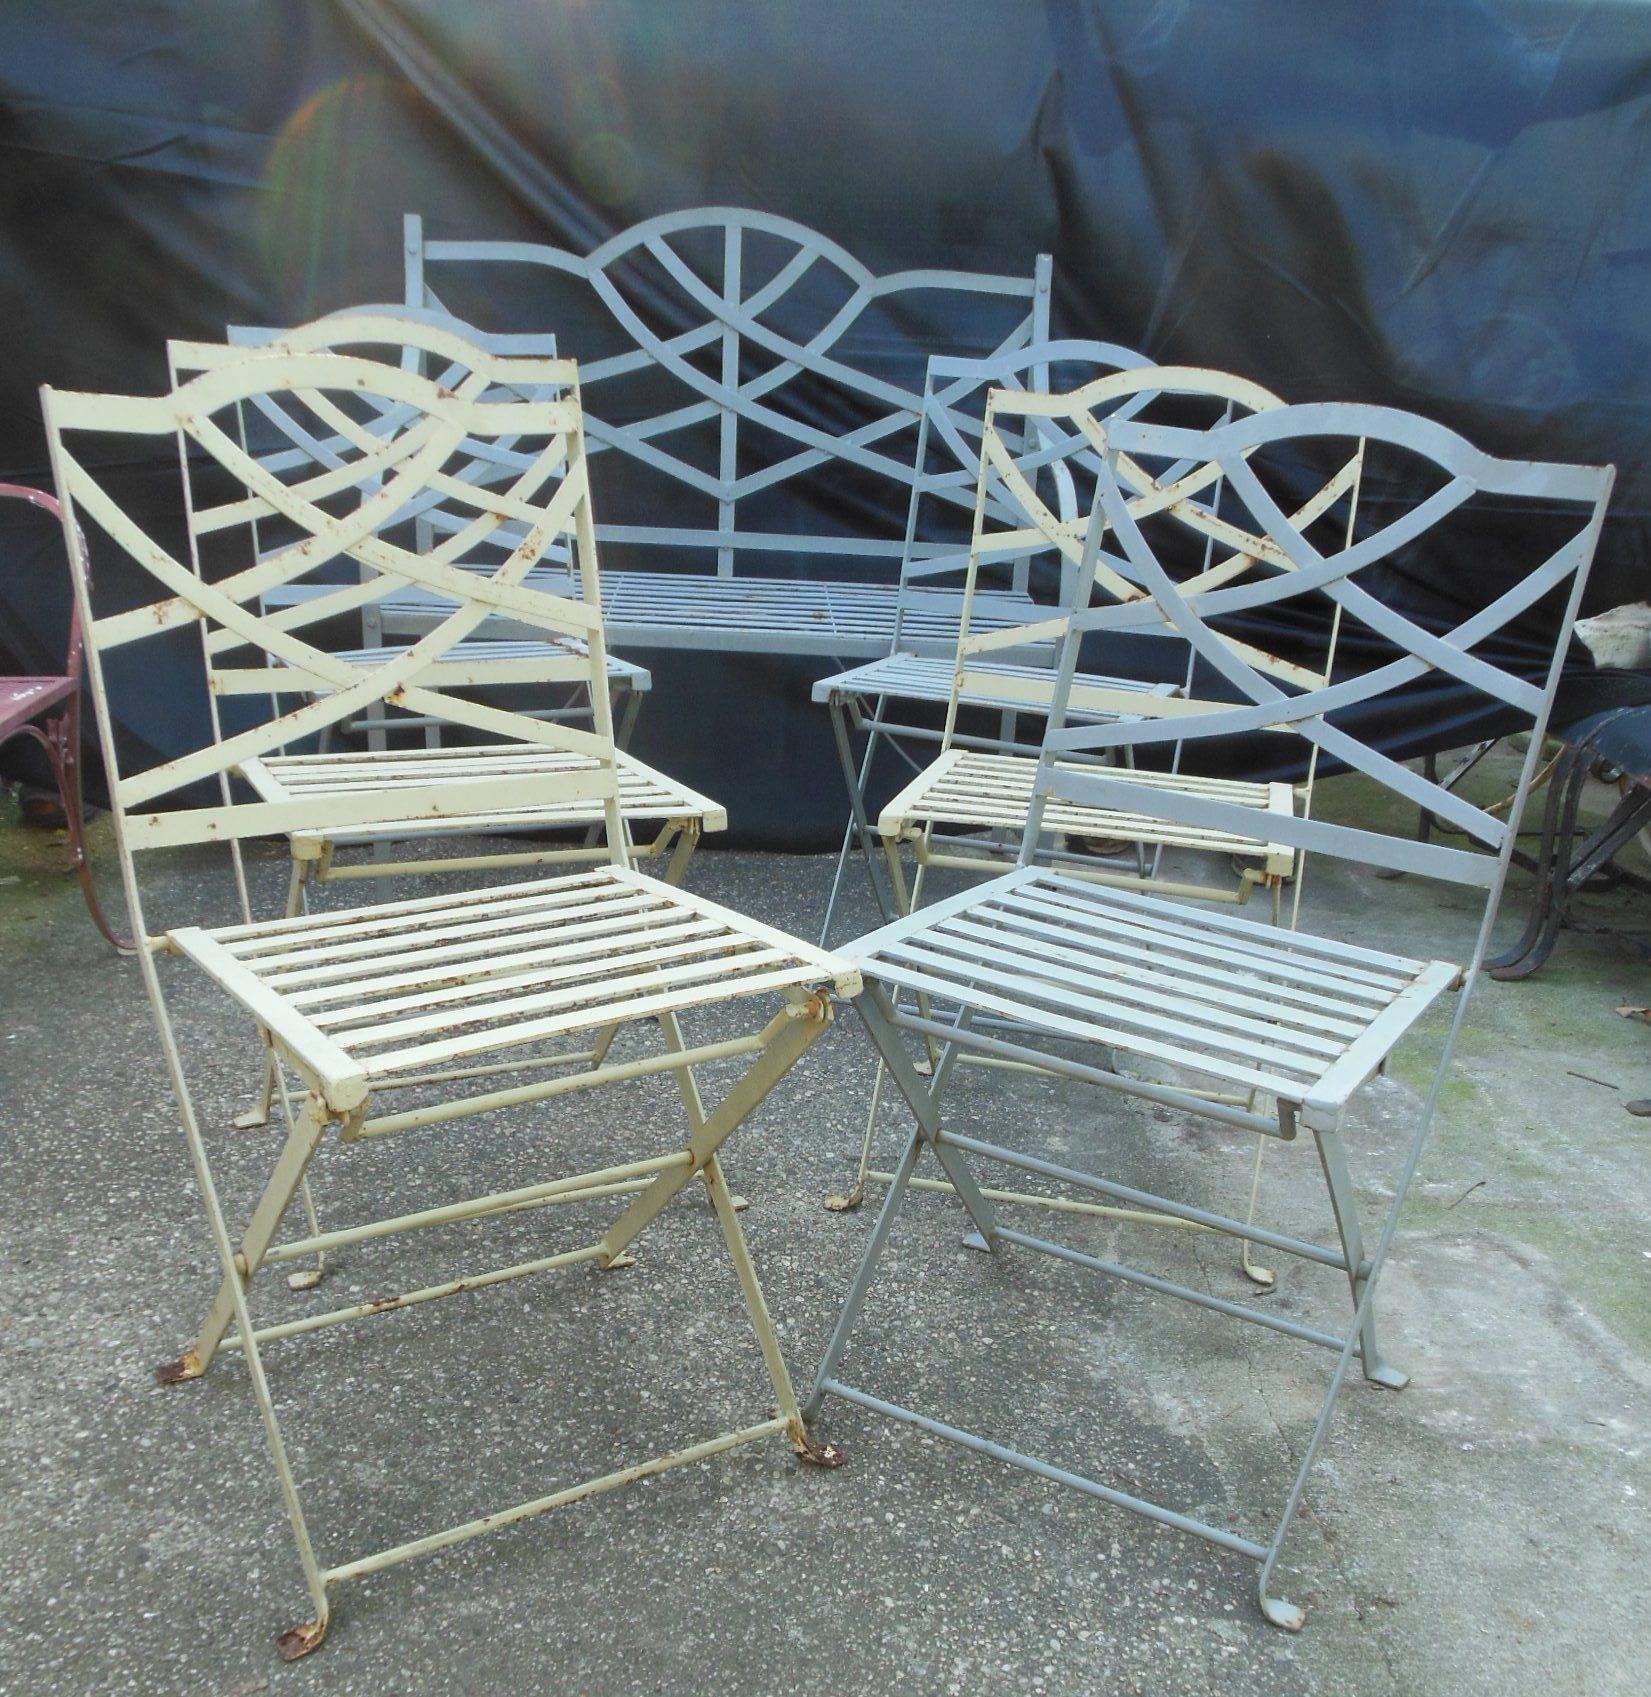 This is an unusual seven piece patio set with six bistro or folding chairs, en suite with a matching wrought iron bench. The chairs do fold as do bistro chairs. However, having a matching bench is unusual. Three of the chairs are gray in color &